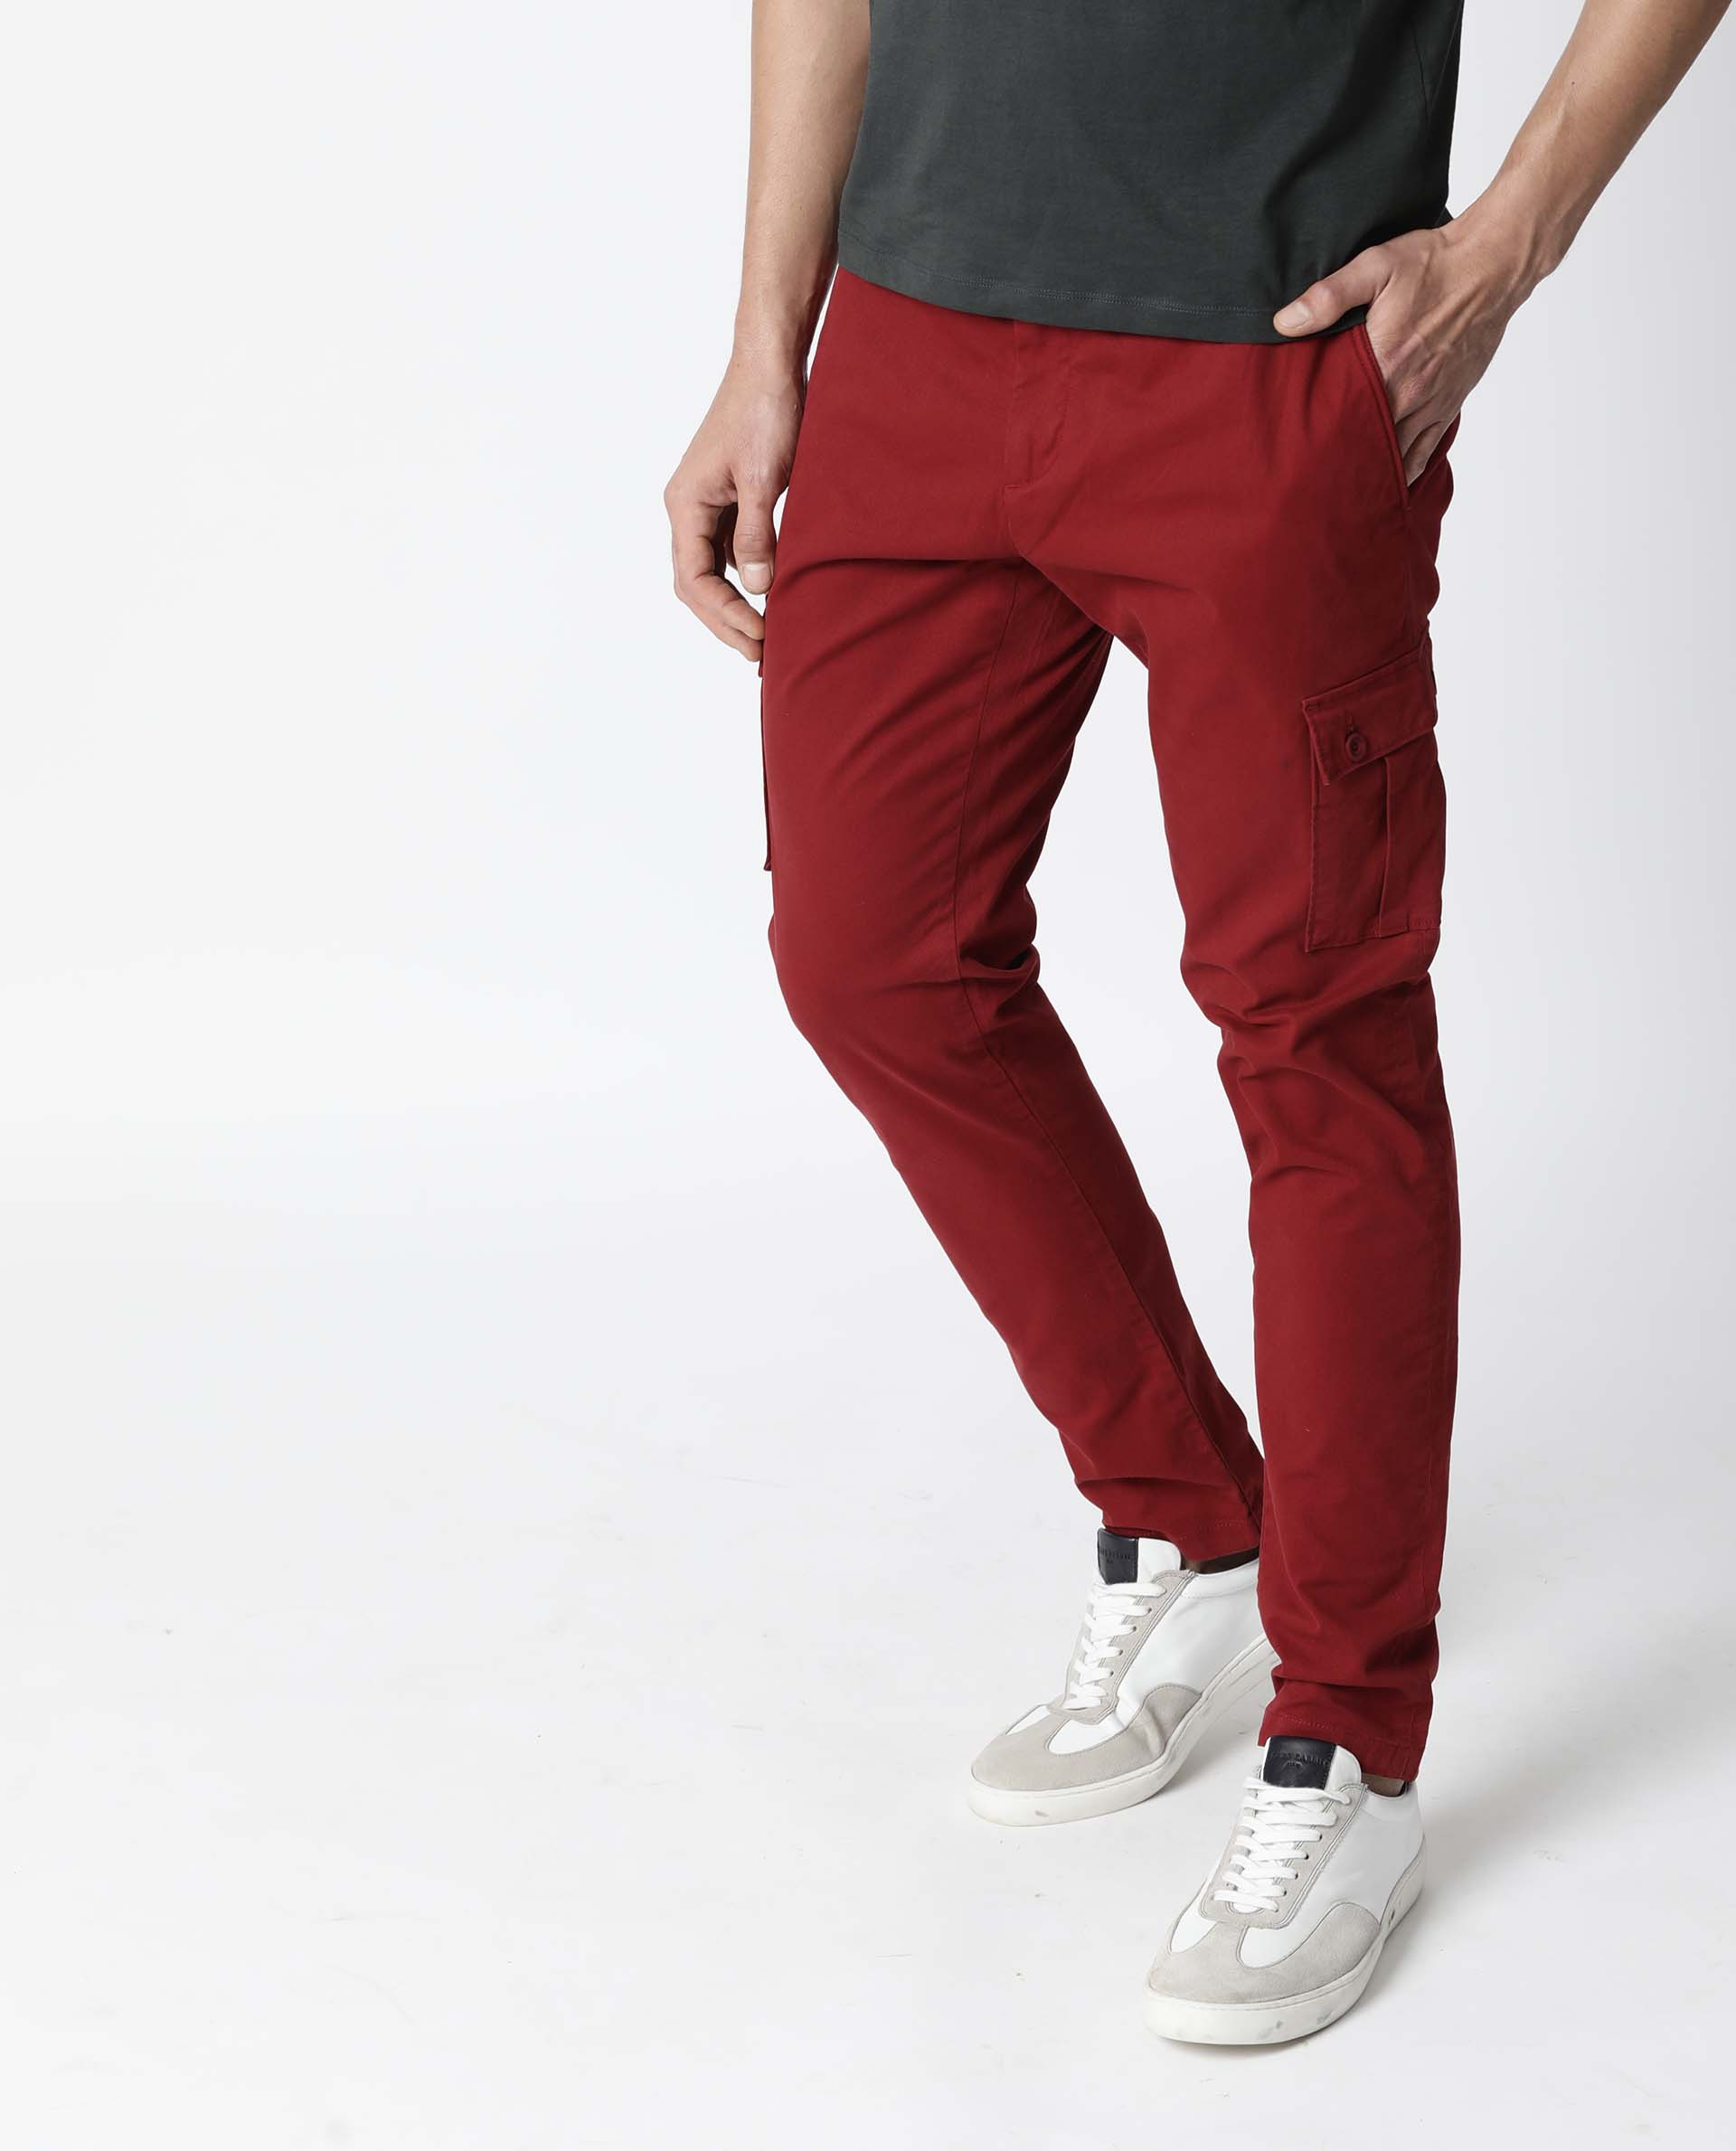 Red Trousers for Men: Buy Red Trousers for Men for Men Online at Low Prices  - Snapdeal India